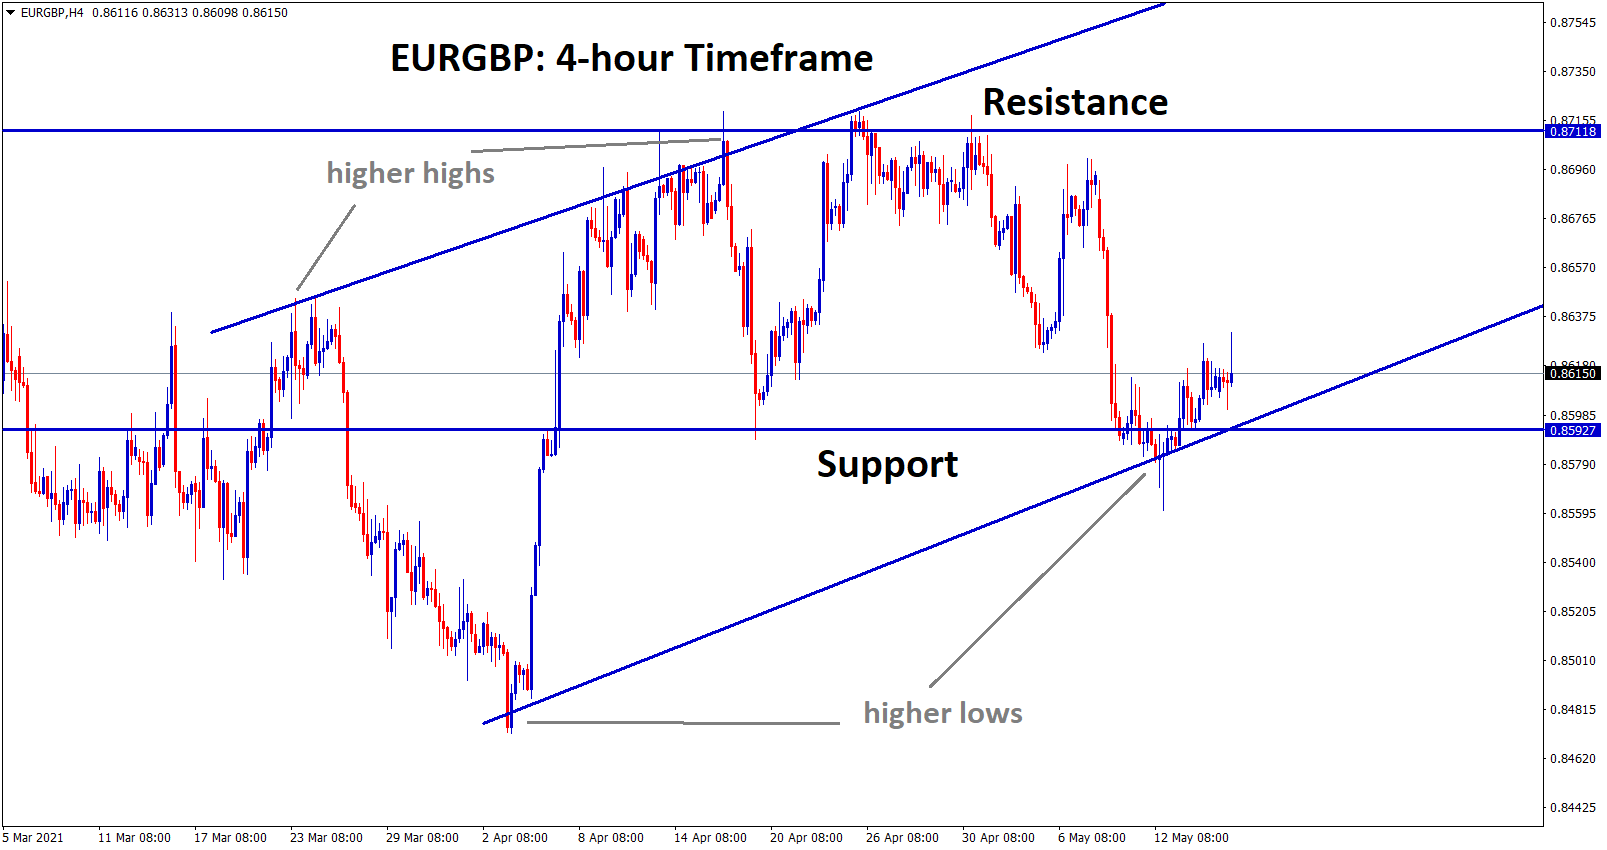 EURGBP bouncing back from the support and higher low level of uptrend line